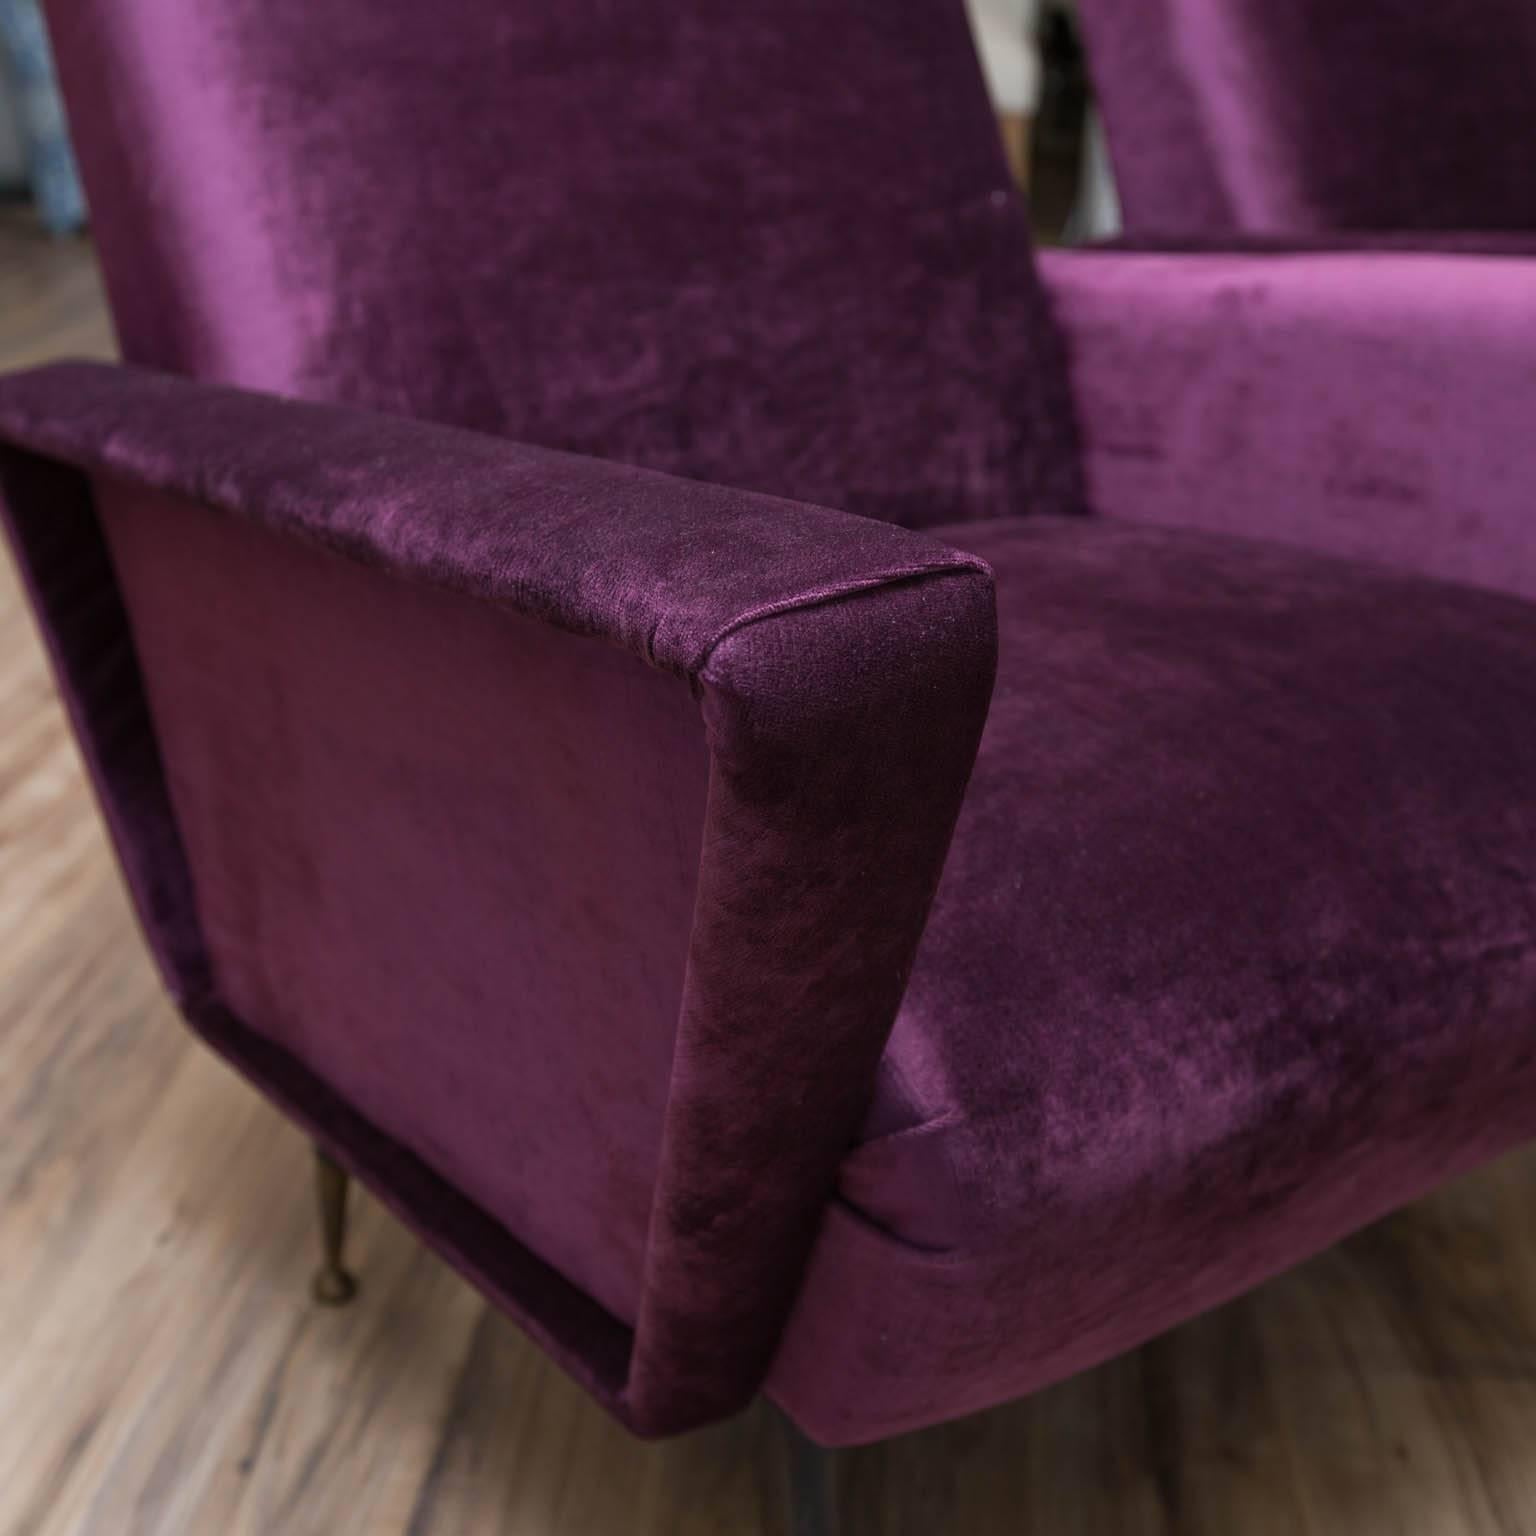 A vintage set of chairs in the manner of Marco Zanuso, but offer a refreshing change from the curved arms of his Lady chair. Just reupholstered in purple velvet.